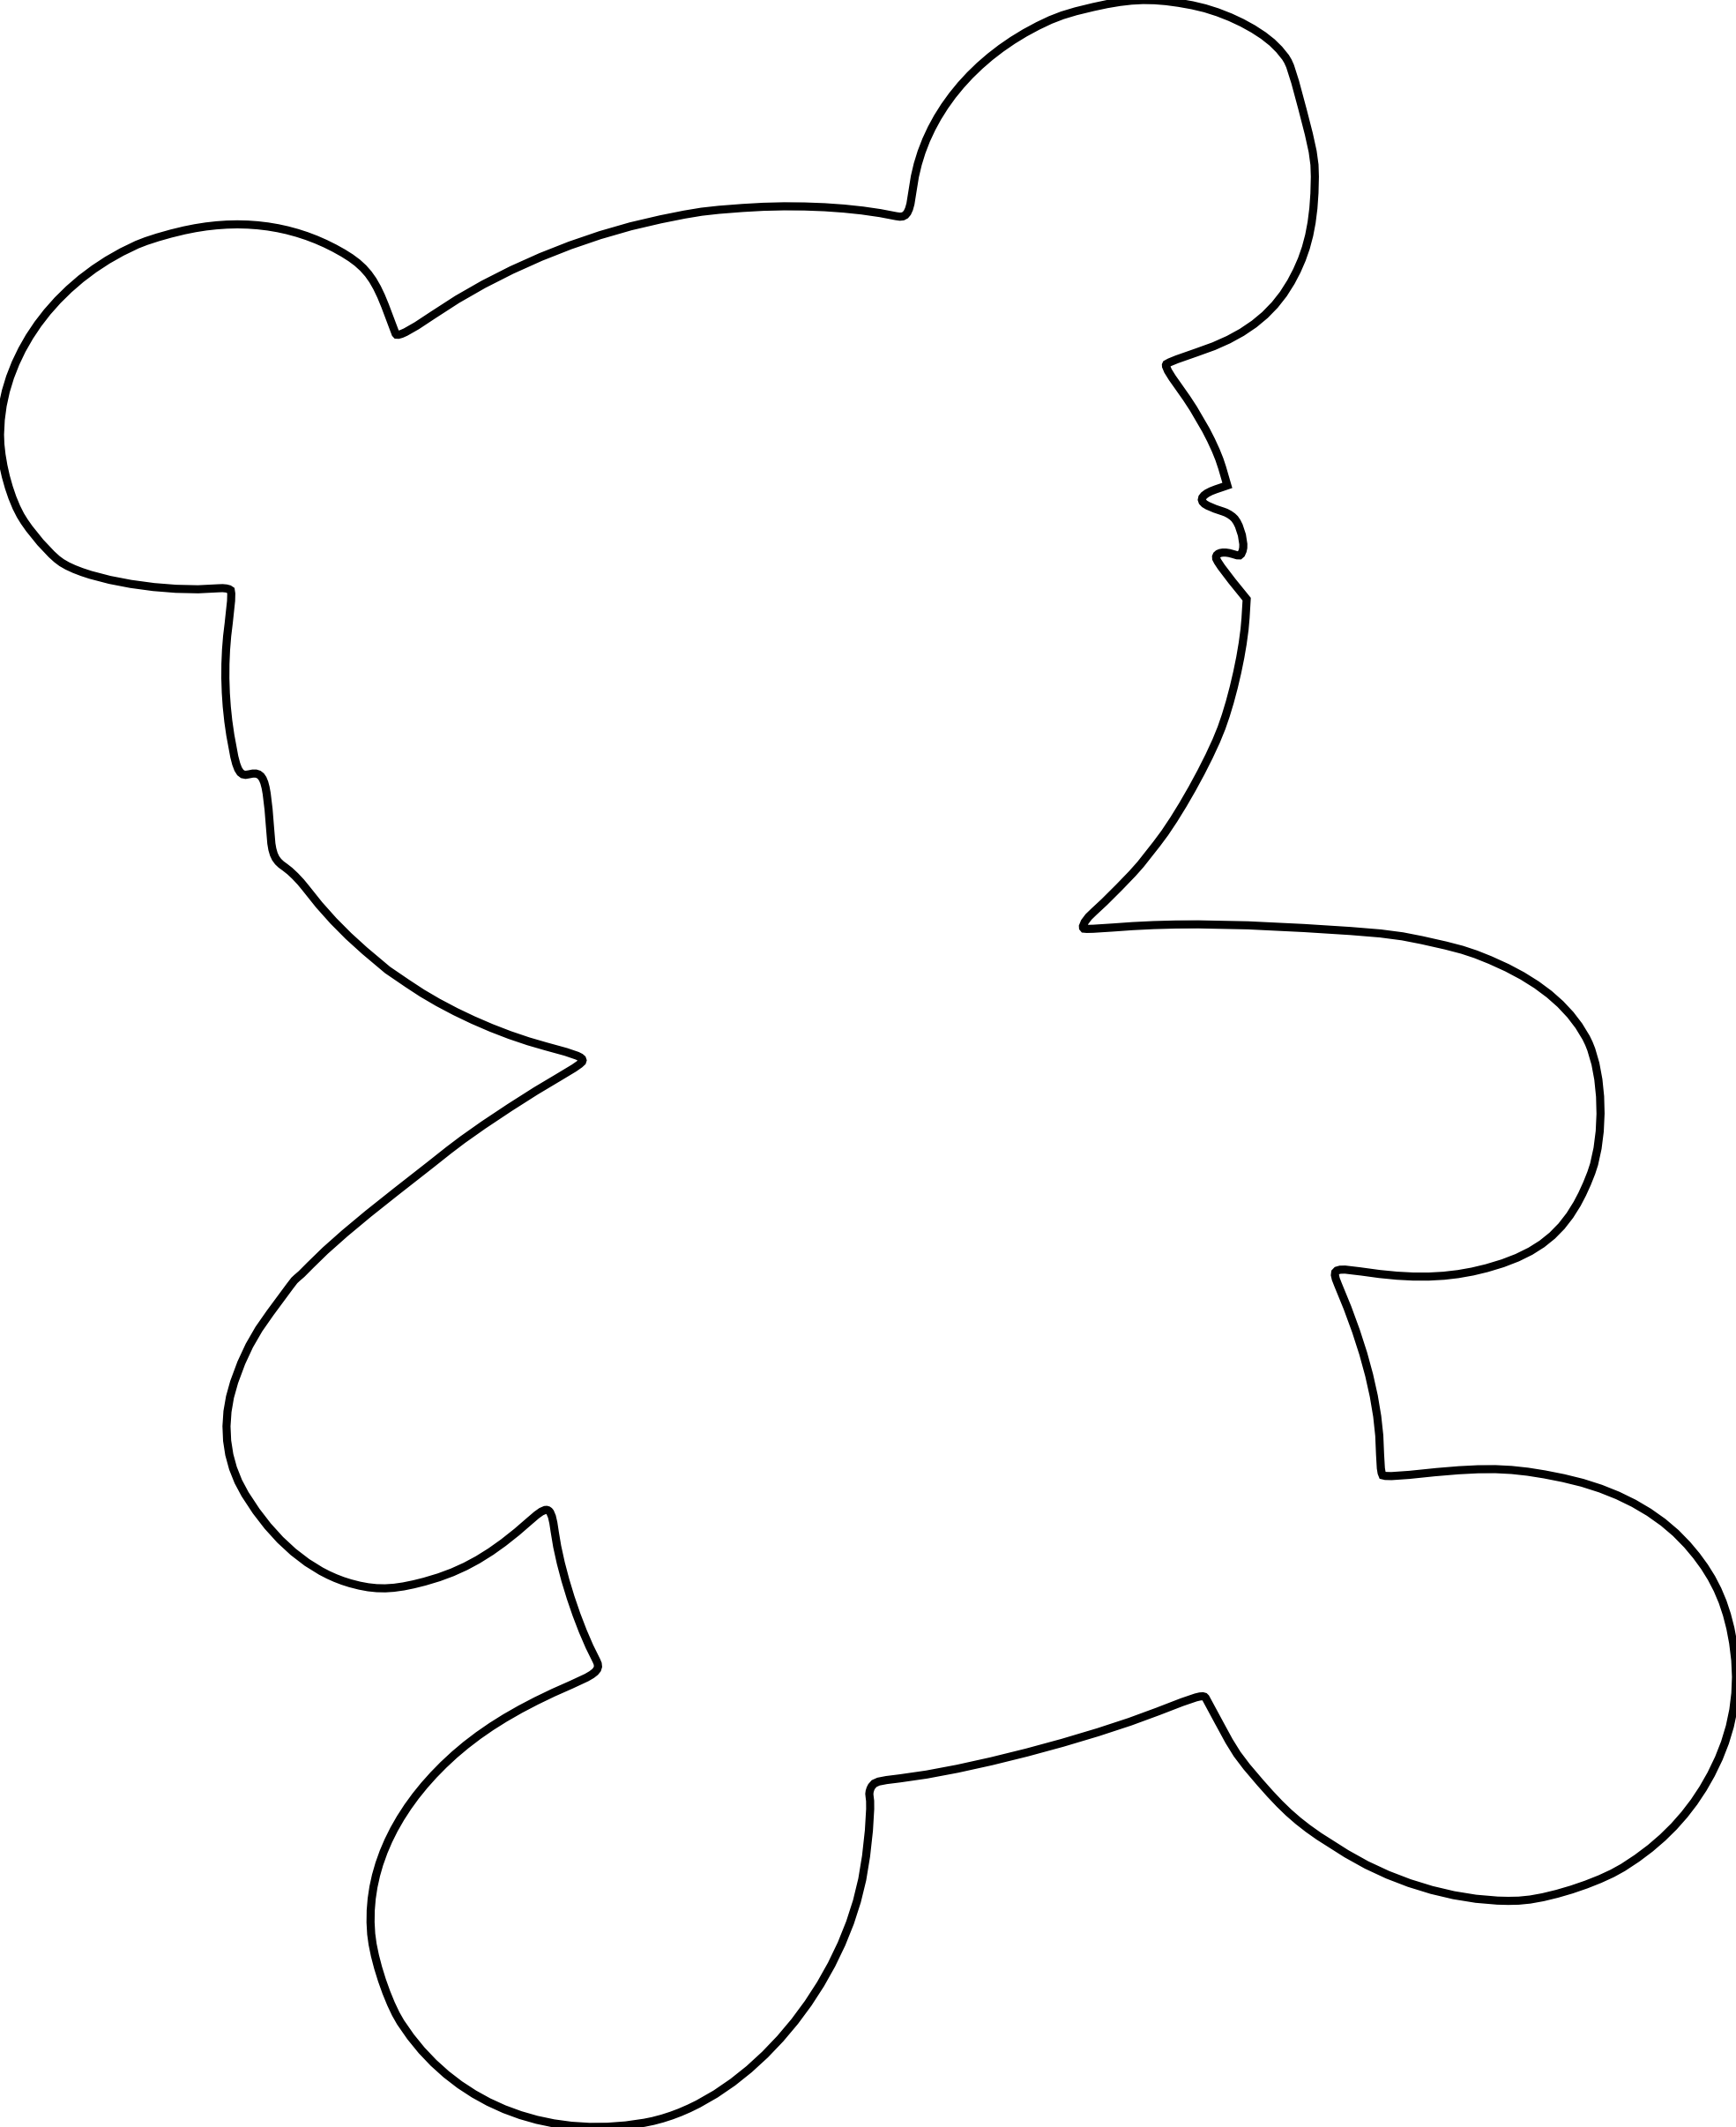 Free Outline Of A Teddy Bear, Download Free Clip Art, Free